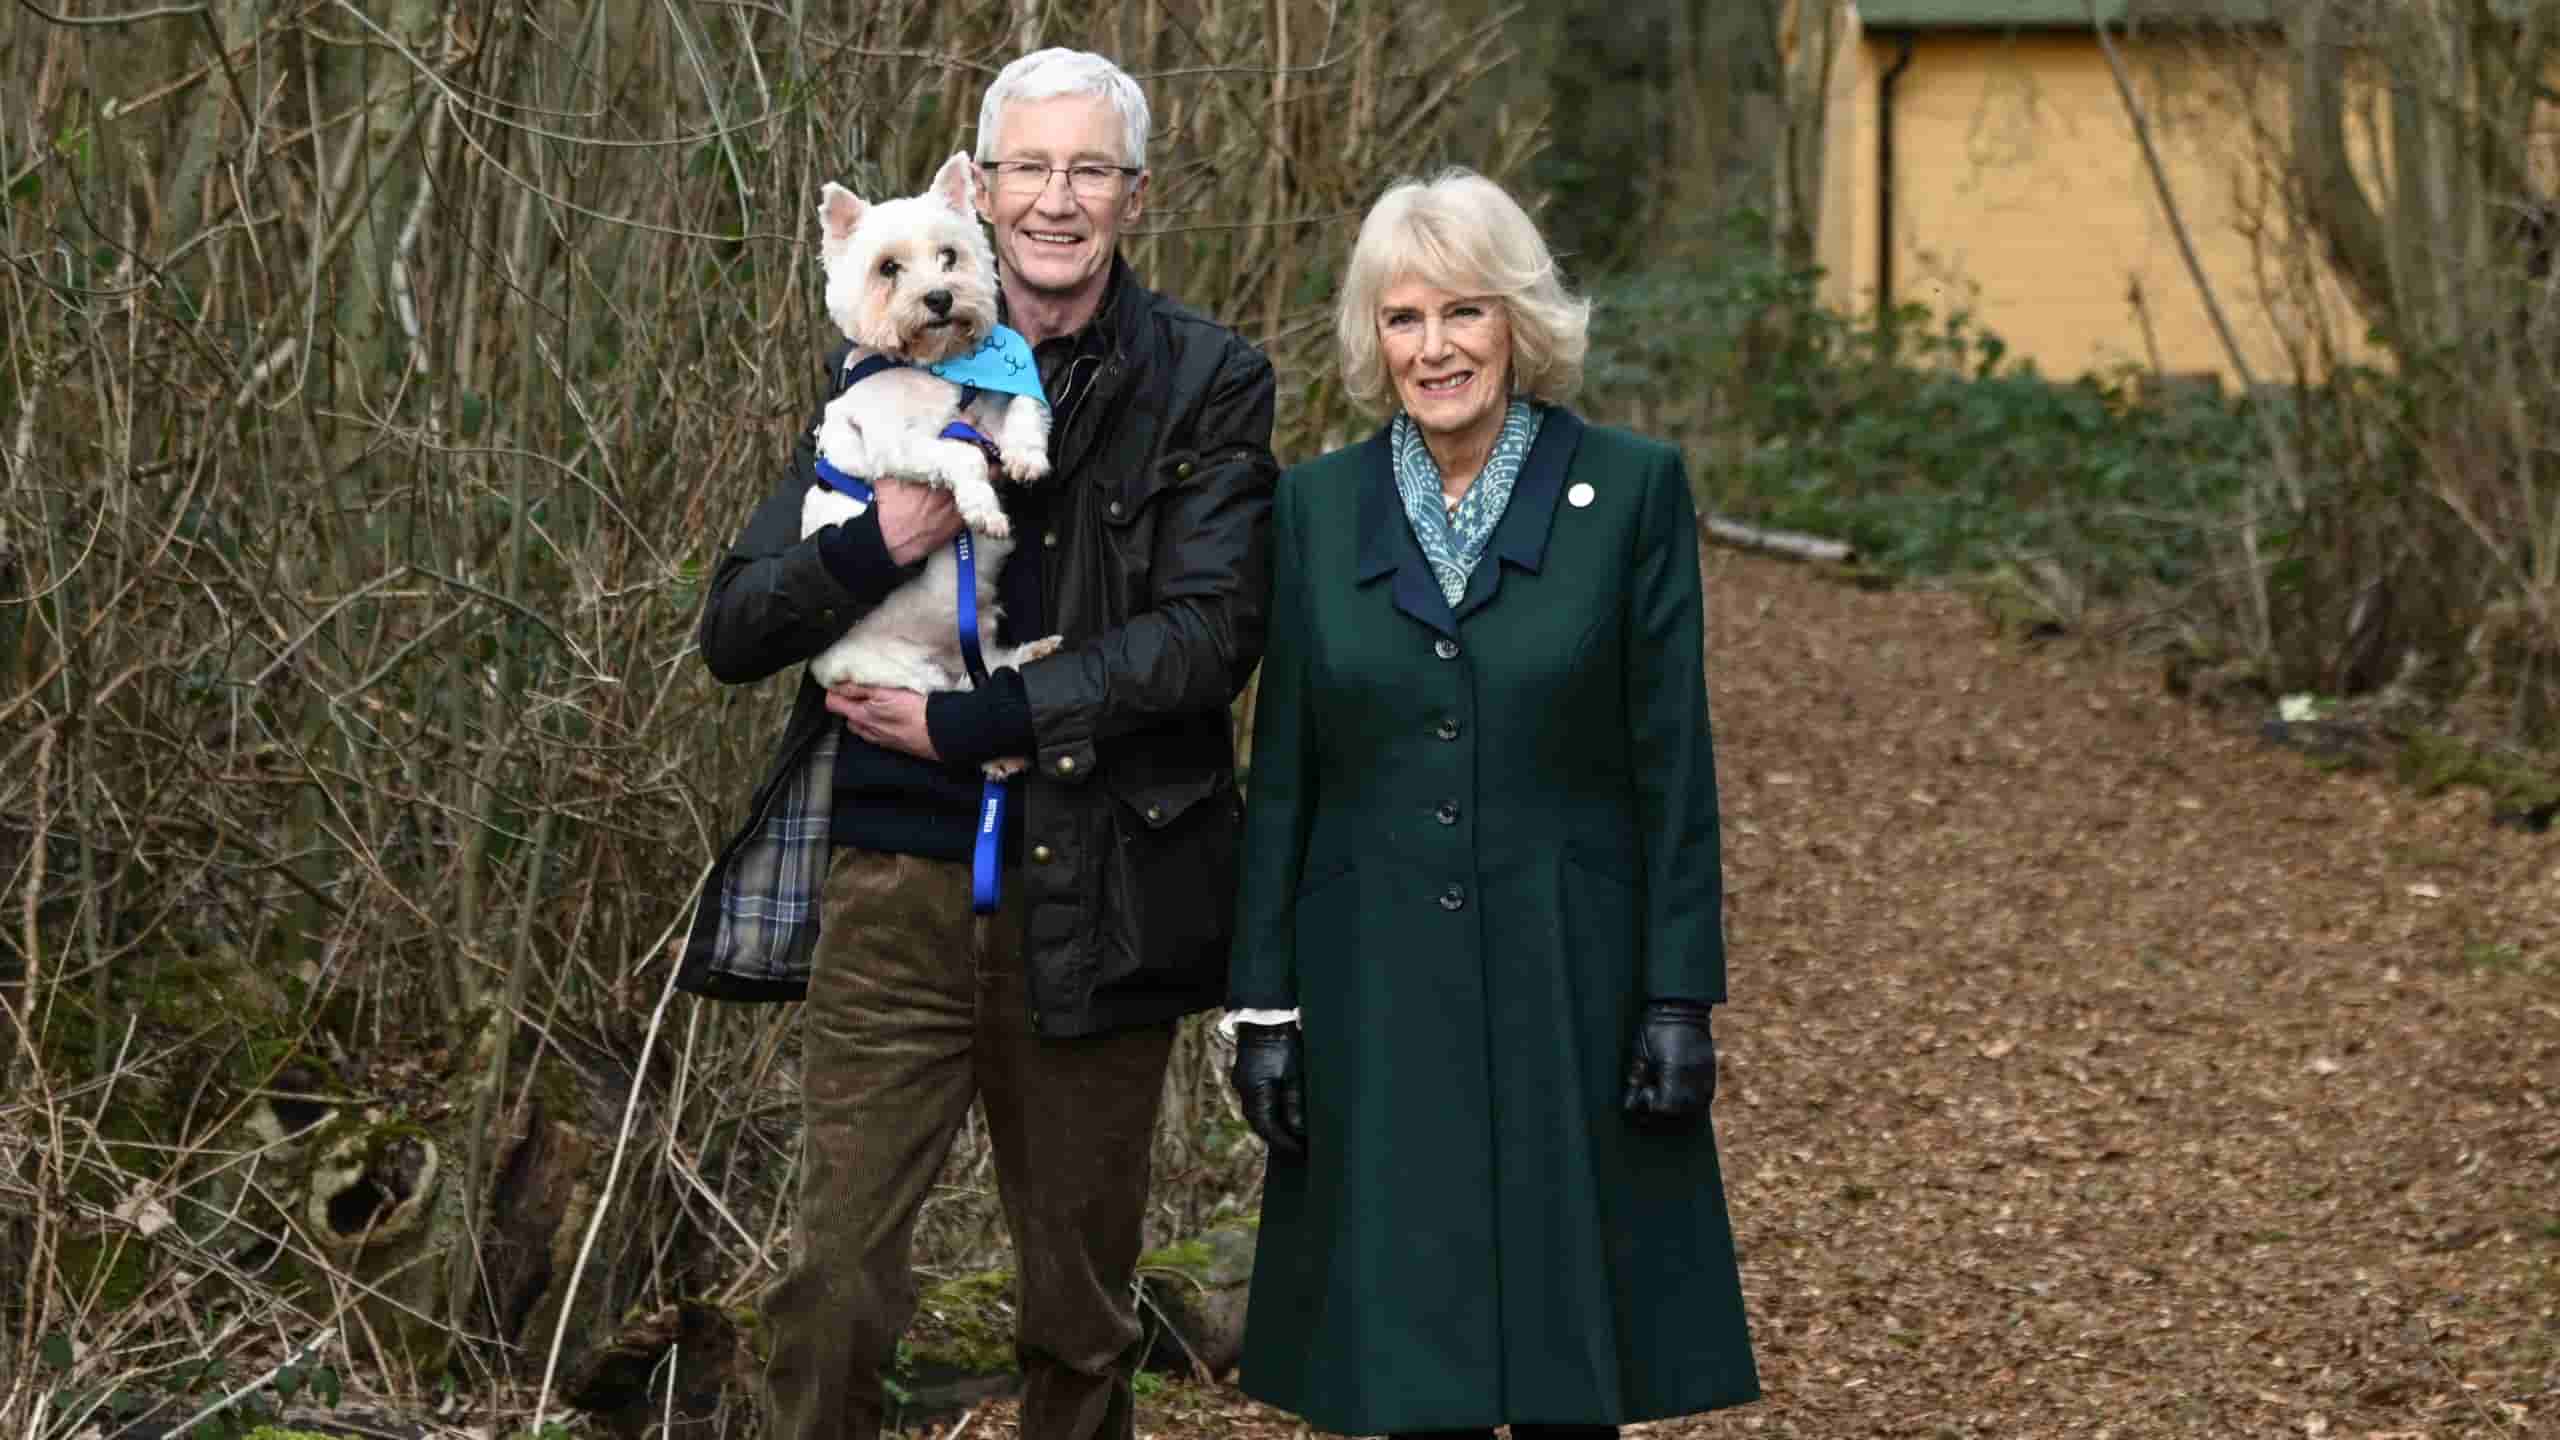 Paul O' Grady "marriage of convenience" with his ex-wife and new "toyboy" husband